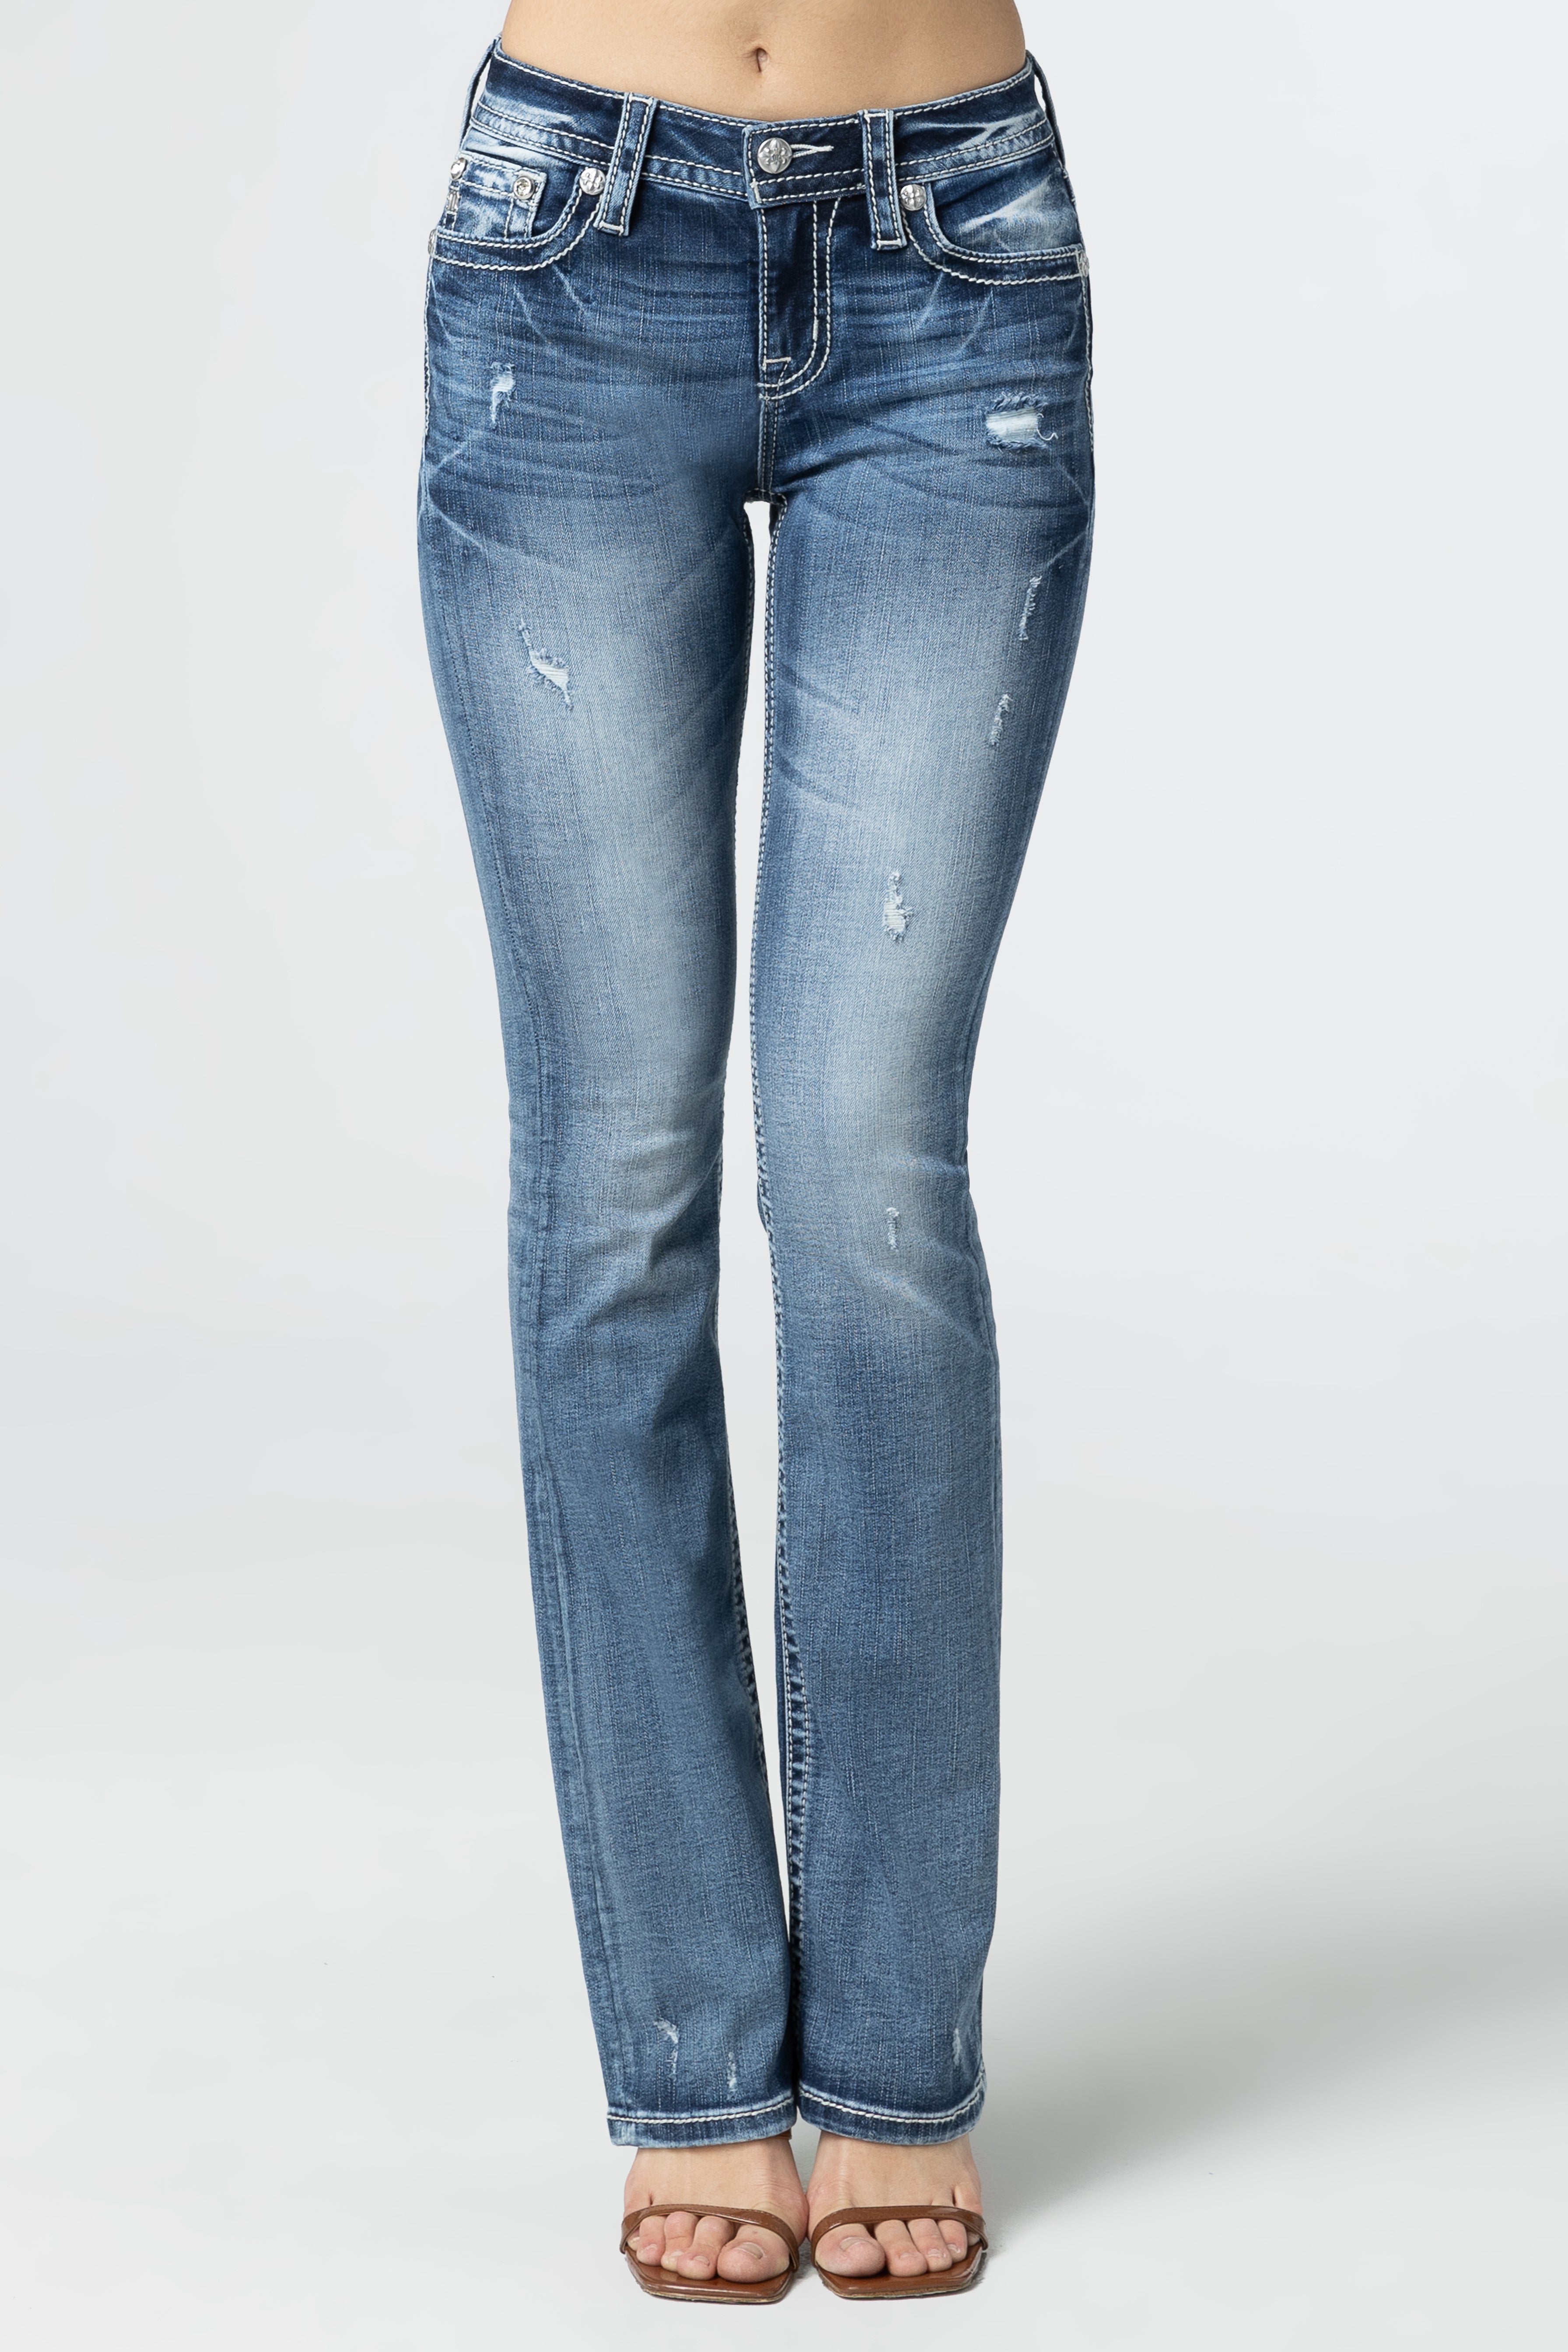 Woven Cross Stitch Bootcut Jeans | Only $119.00